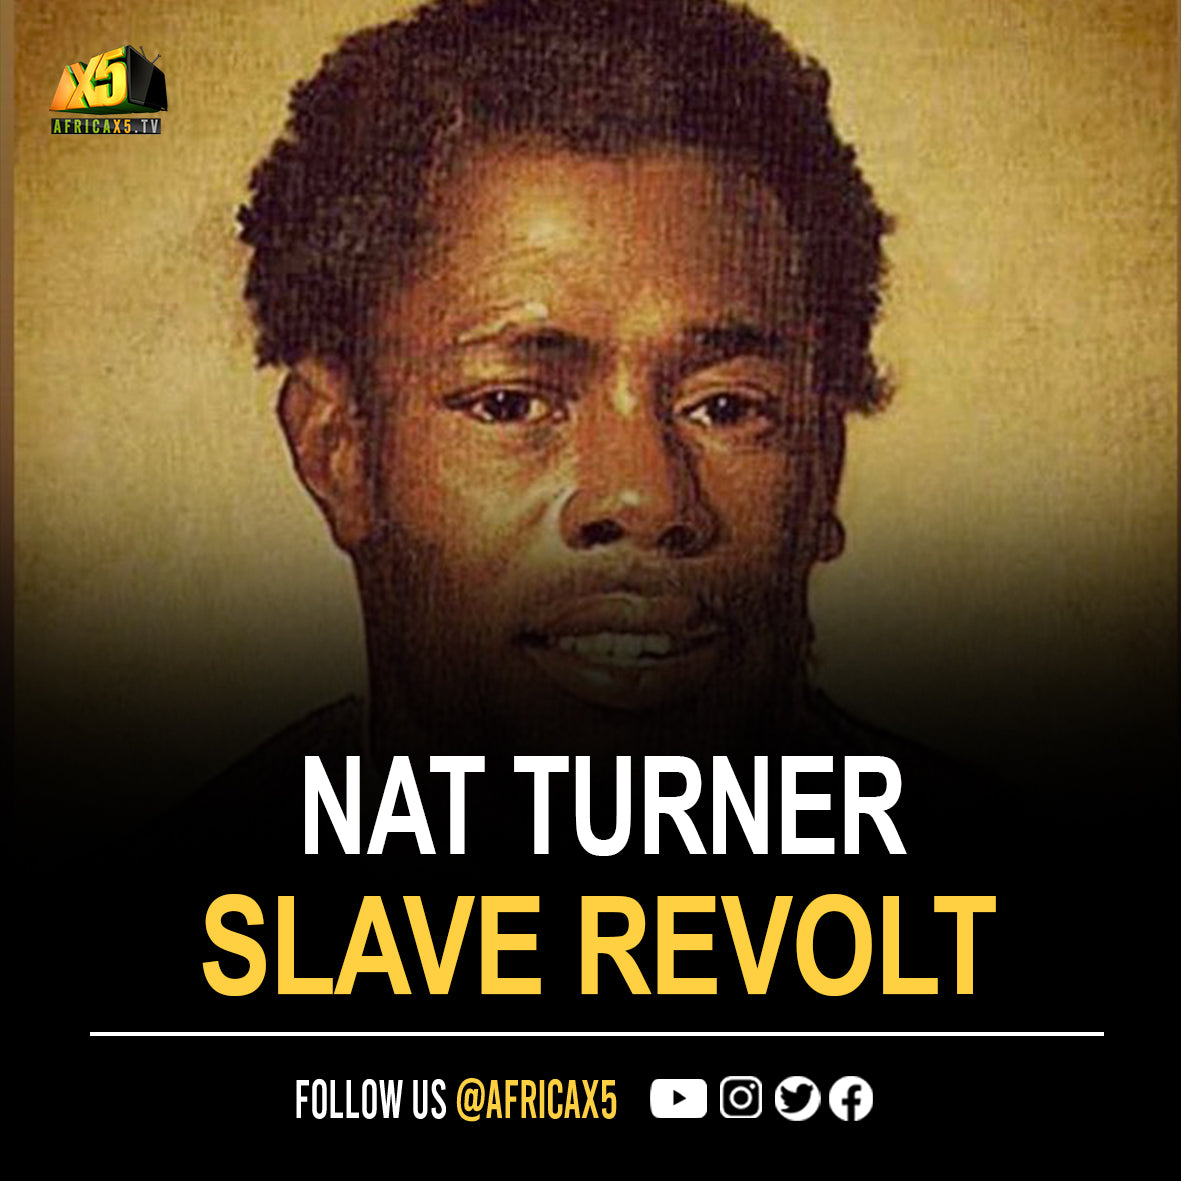 On October 21 st 1831, Nat Turner started what is considered the most deadly slave revolt in the history of the United States , the Nat Turner Rebellion.